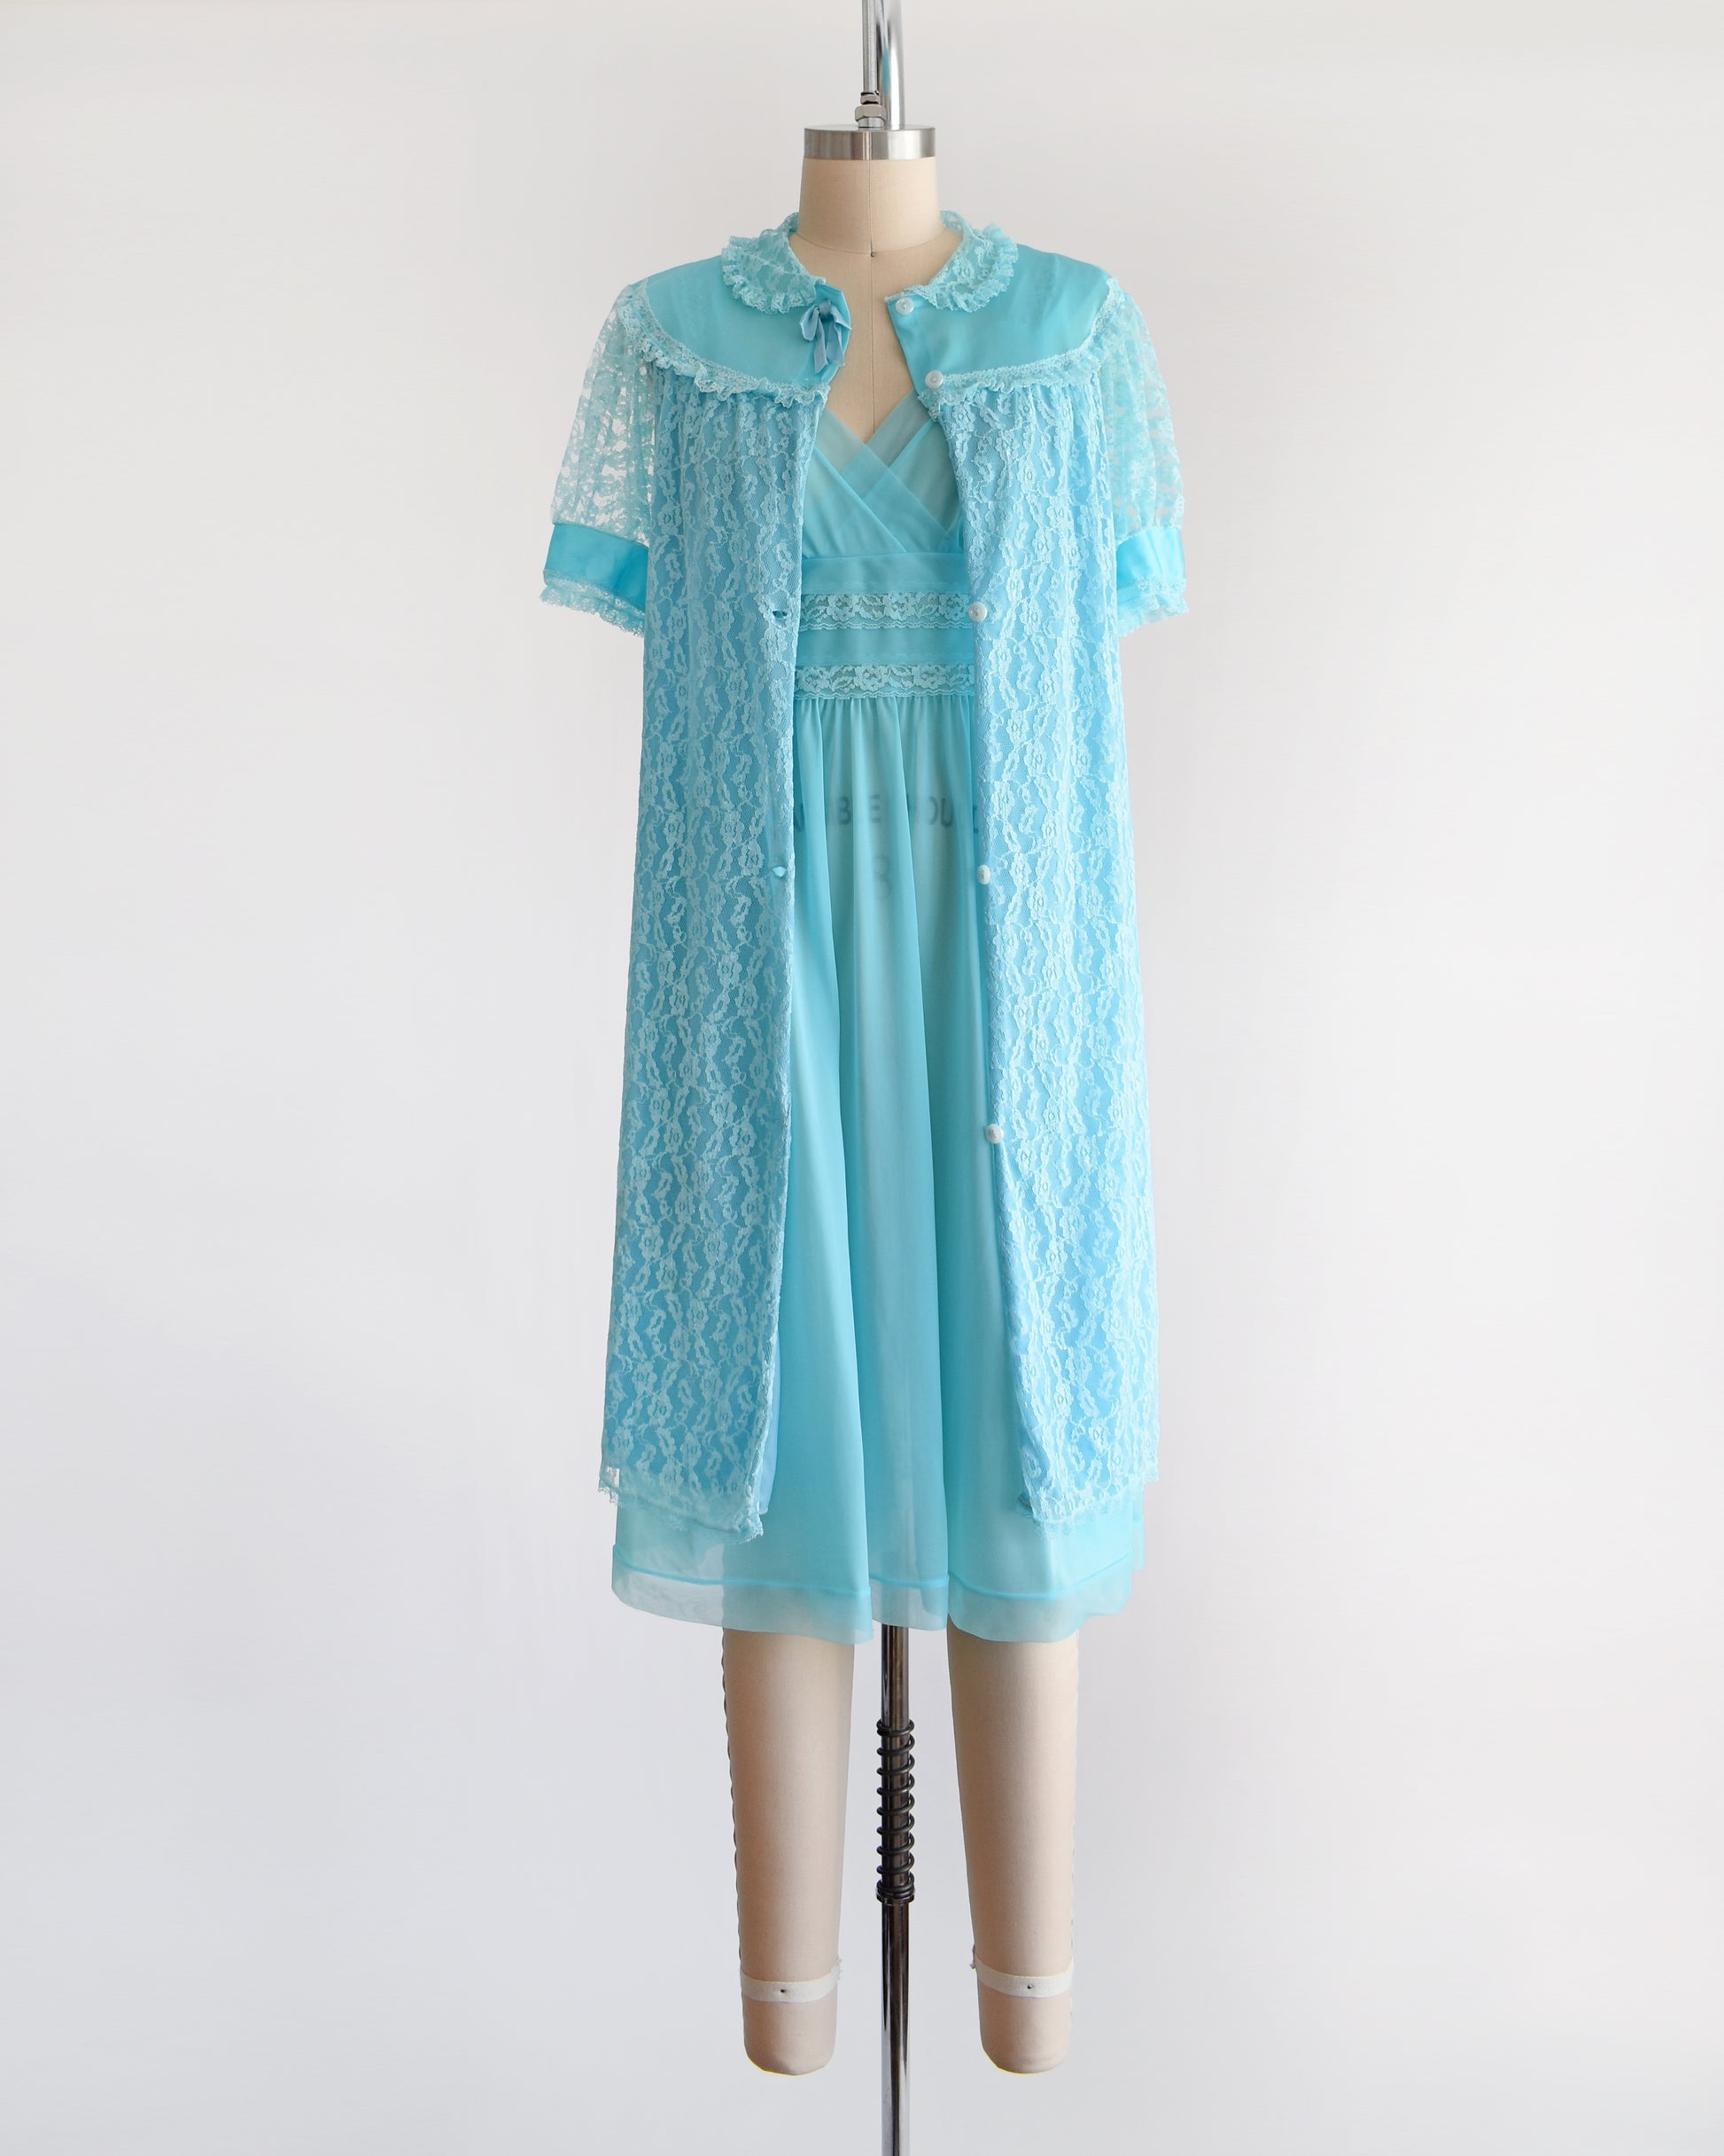 A vintage 1960s aqua blue peignoir set that comes with a lace robe and matching nightgown. The robe is unbuttoned in this photo.